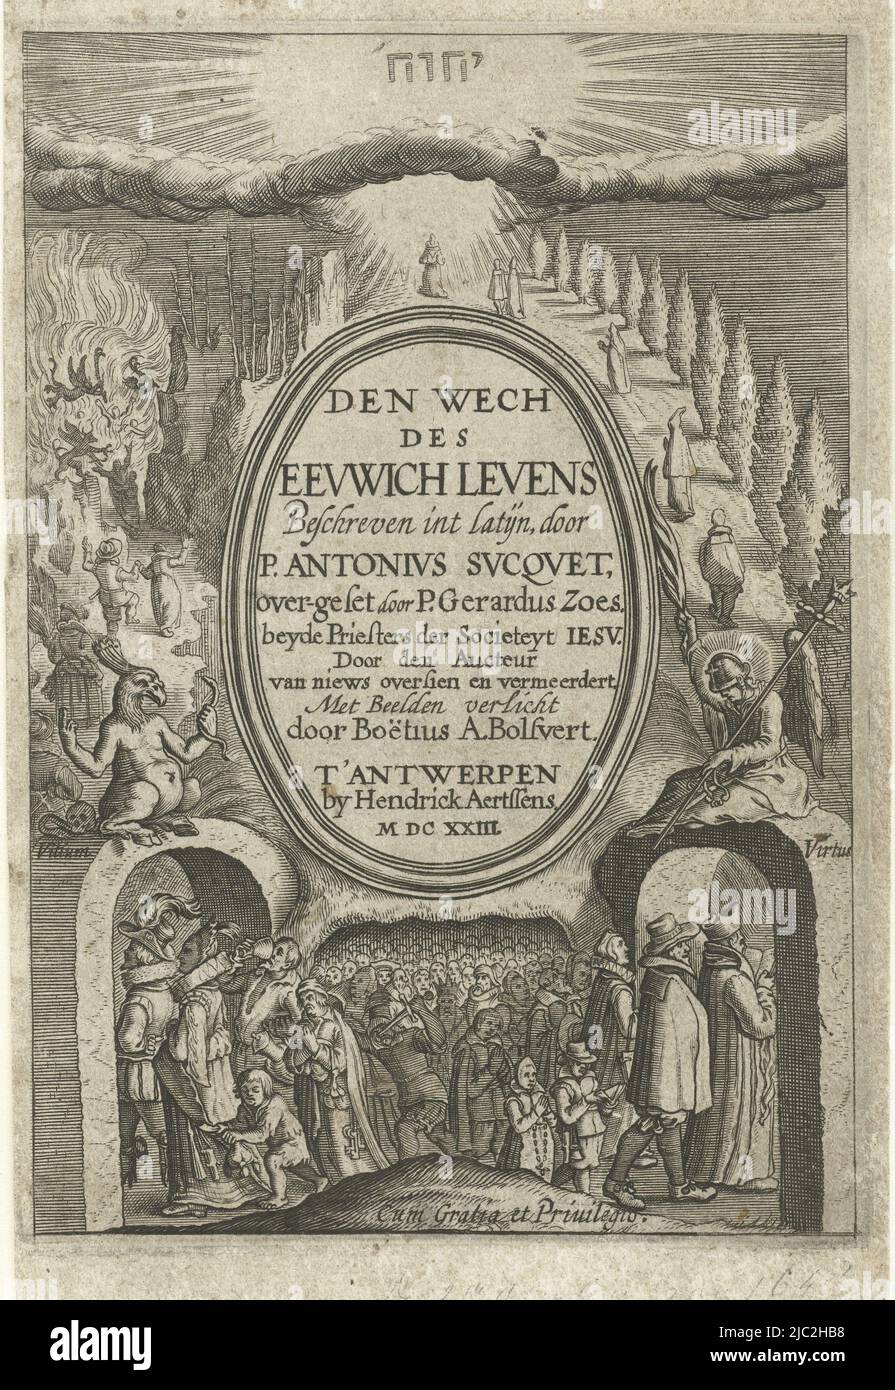 Emblem showing the way to eternal life for the righteous and the way to hell for the wicked Den wech des eeuwich levens (series title on object), Boëtius Adamsz. Bolswert, print maker: anonymous, publisher: Hendrik Aertssens (II), Antwerp, 1620 - 1623 and/or 1623, paper, engraving, h 156 mm × w 98 mm Stock Photo